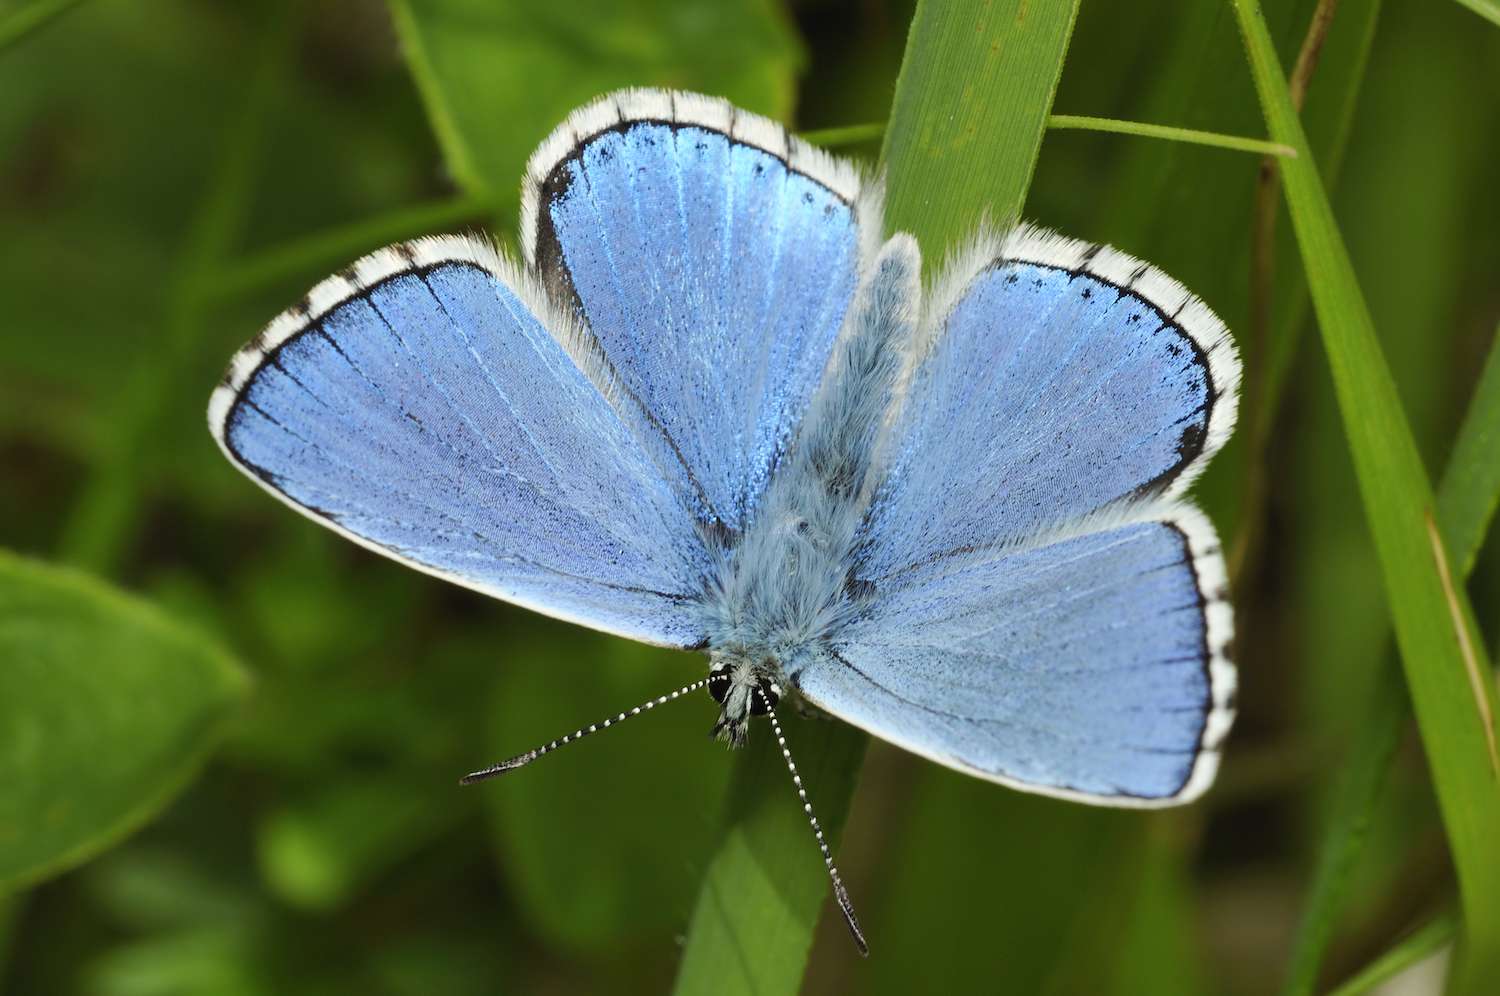 Male Adonis blue butterfly in Cotswolds England